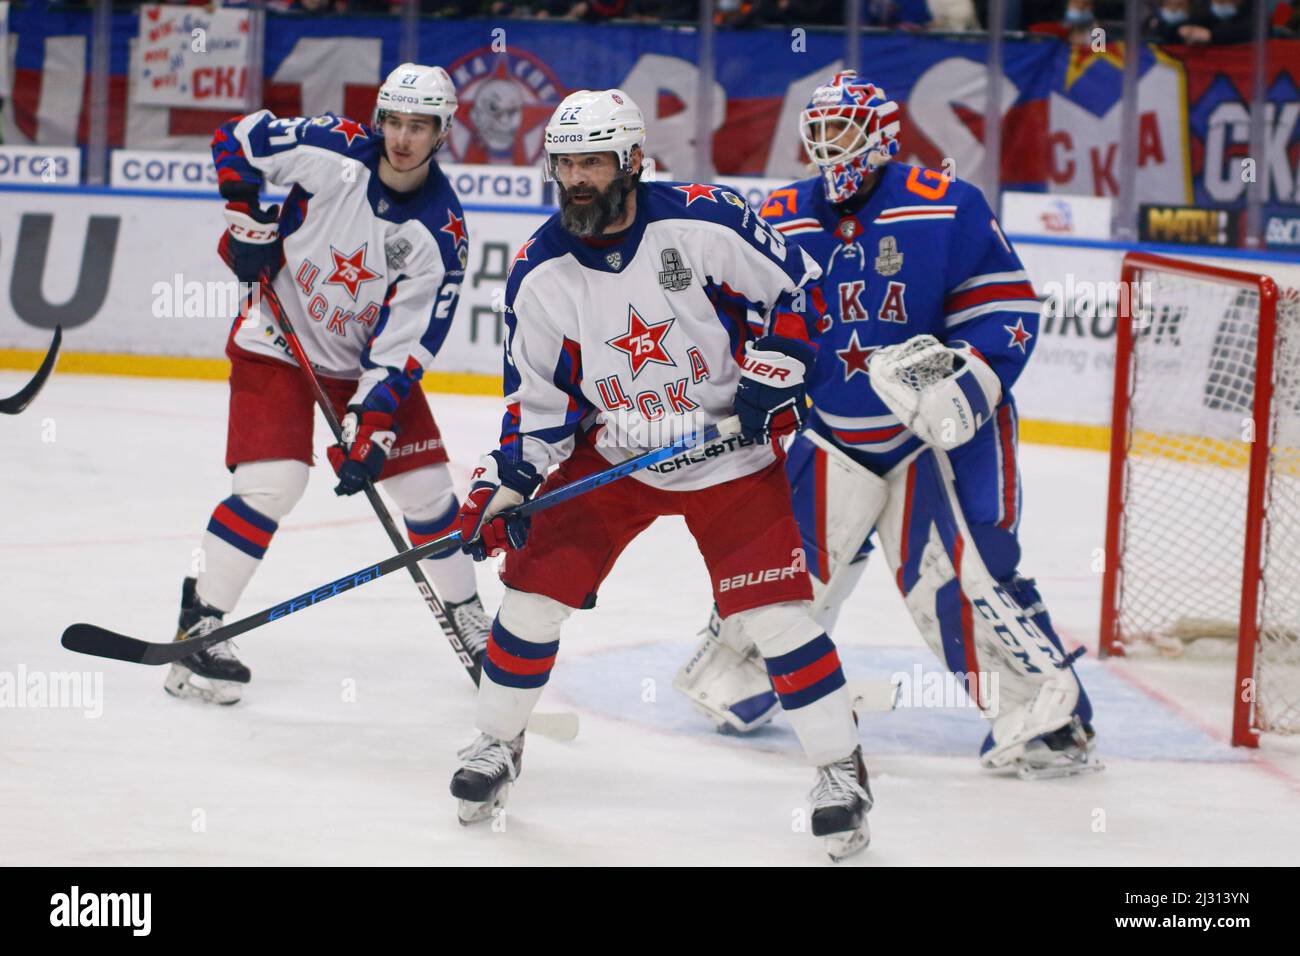 Khl ice hockey hi-res stock photography and images